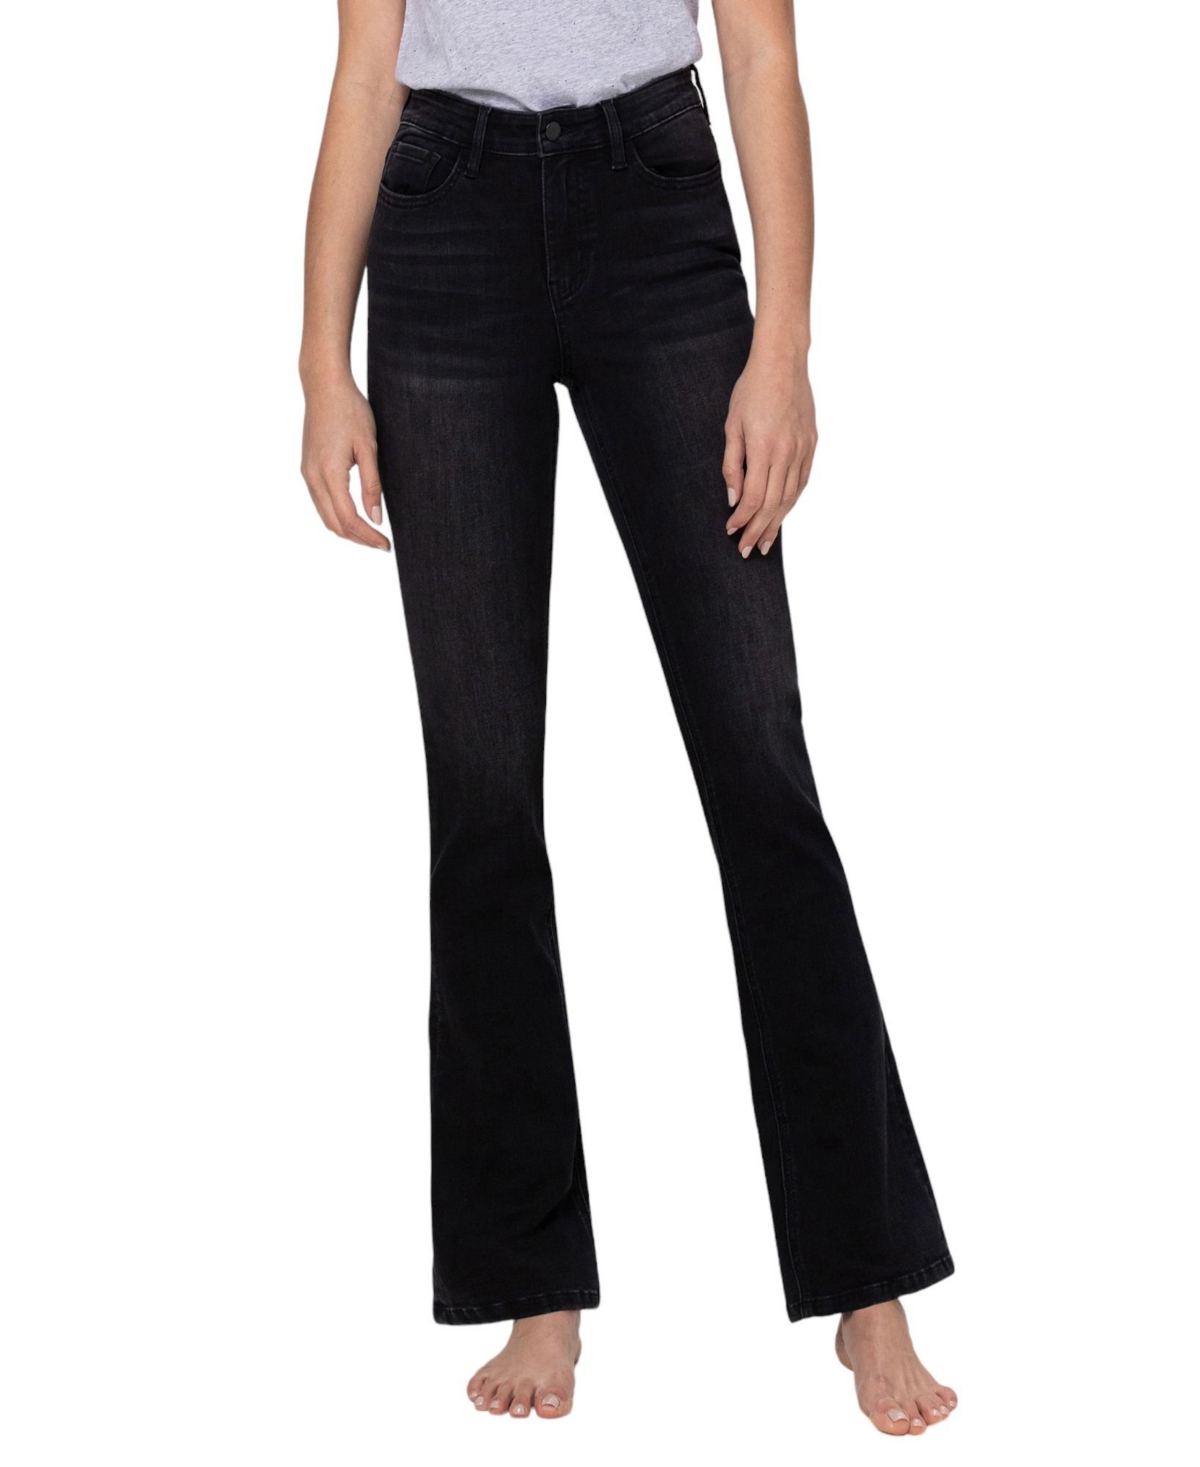 Women's High Rise Slim Bootcut Jeans - Significant black